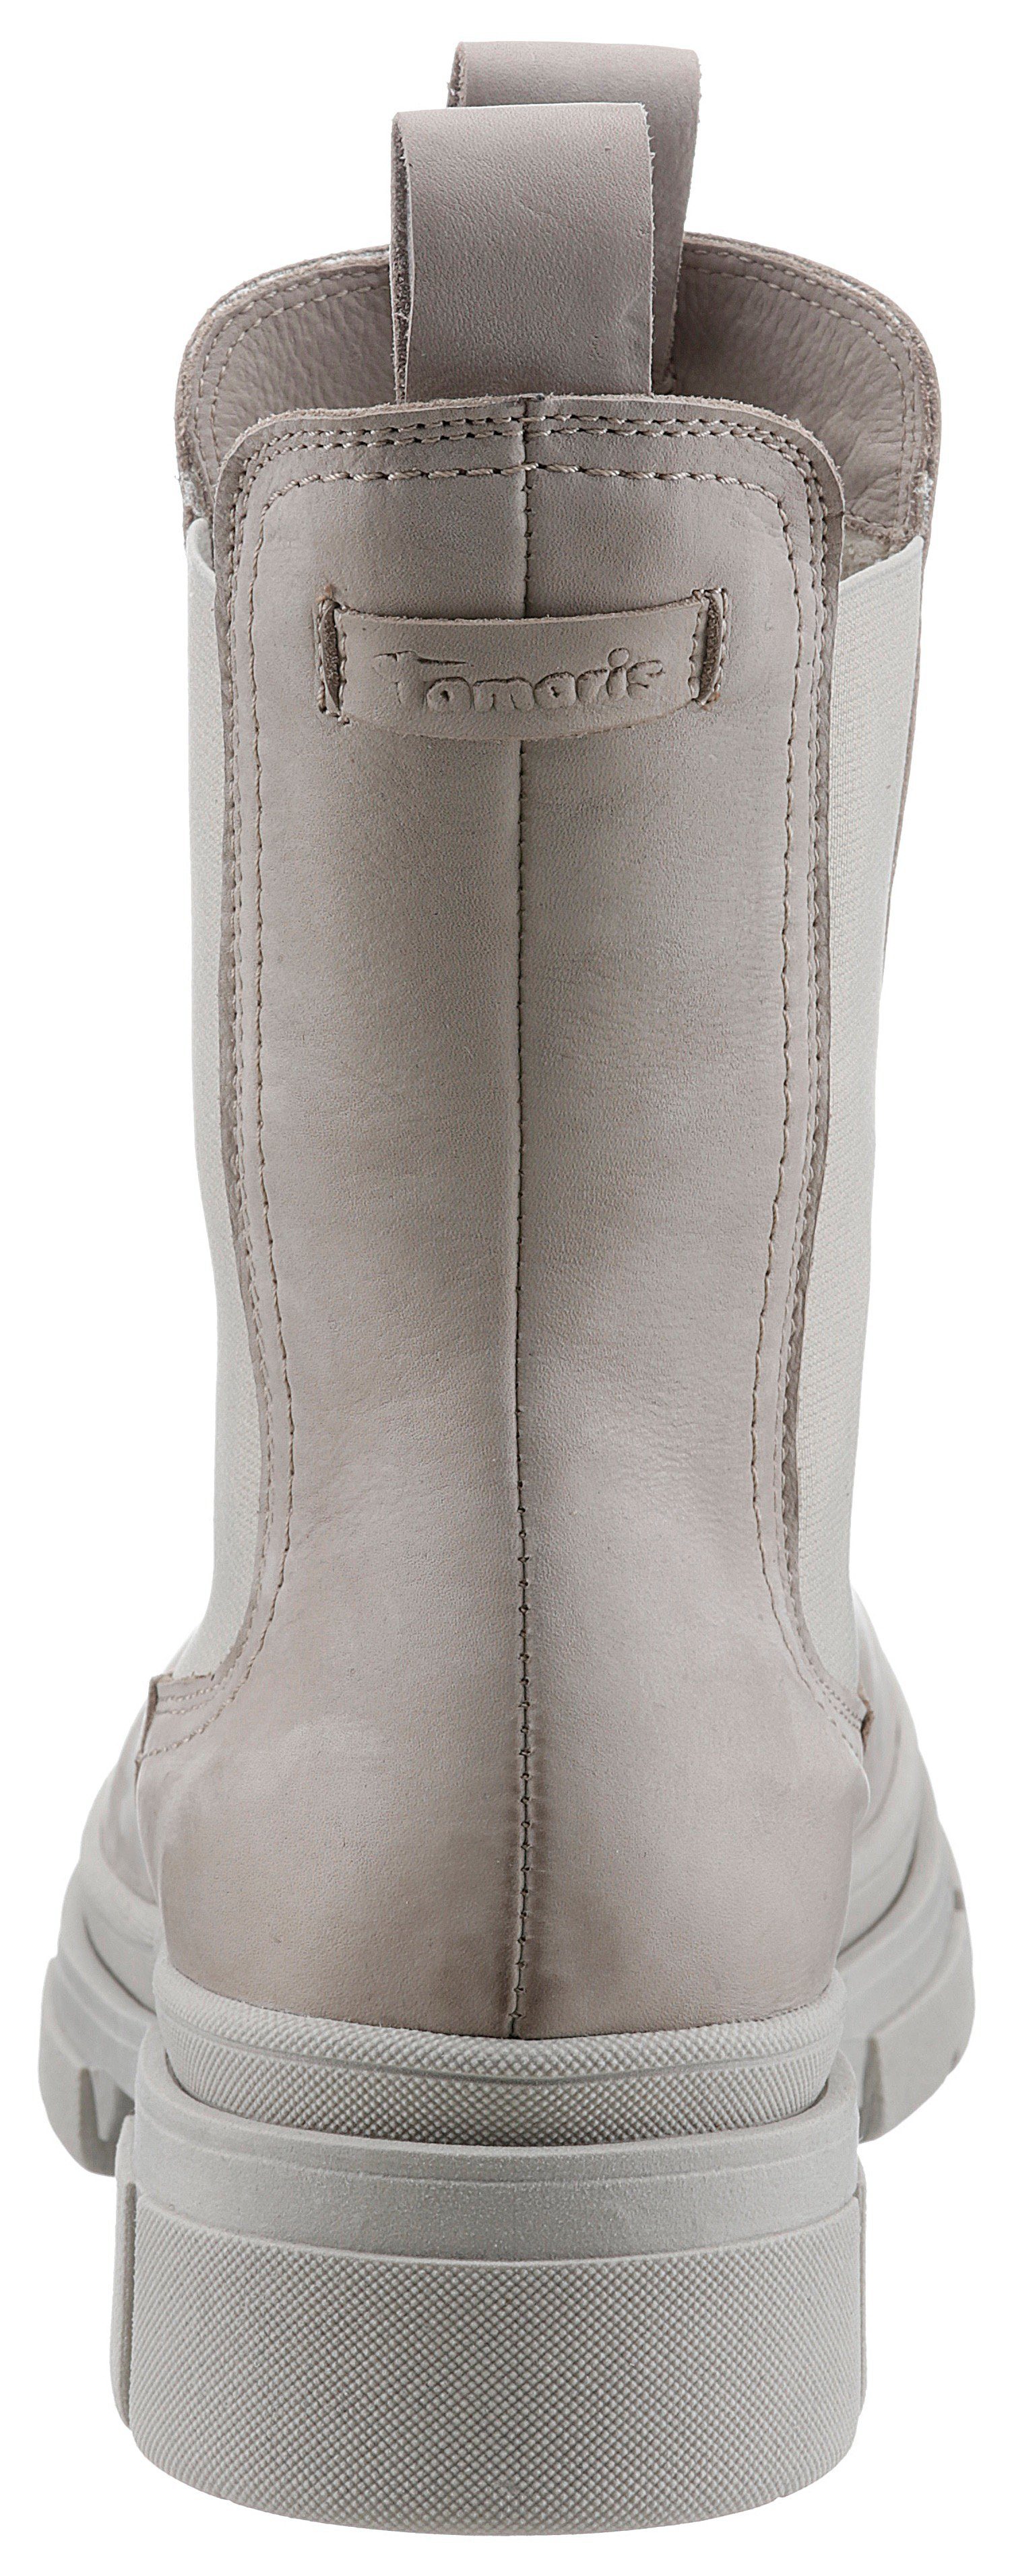 Tamaris bequemer taupe Chelseaboots in Form